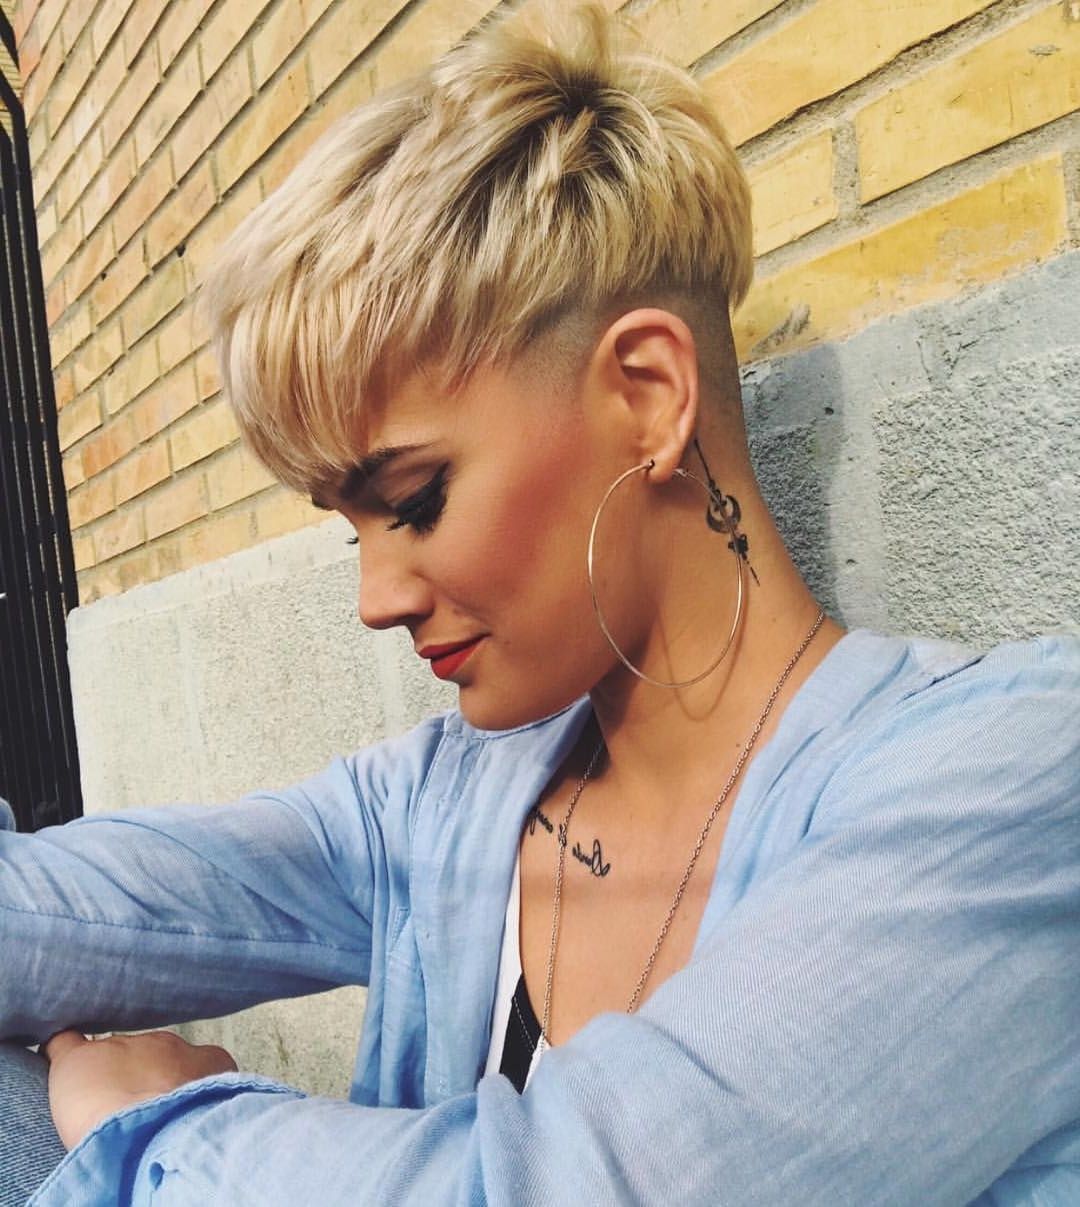 Best And Newest Undercut Blonde Pixie Hairstyles With Dark Roots In 10 Stylish Pixie Haircuts – Women Short Undercut Hairstyles 2018 –  (View 19 of 20)